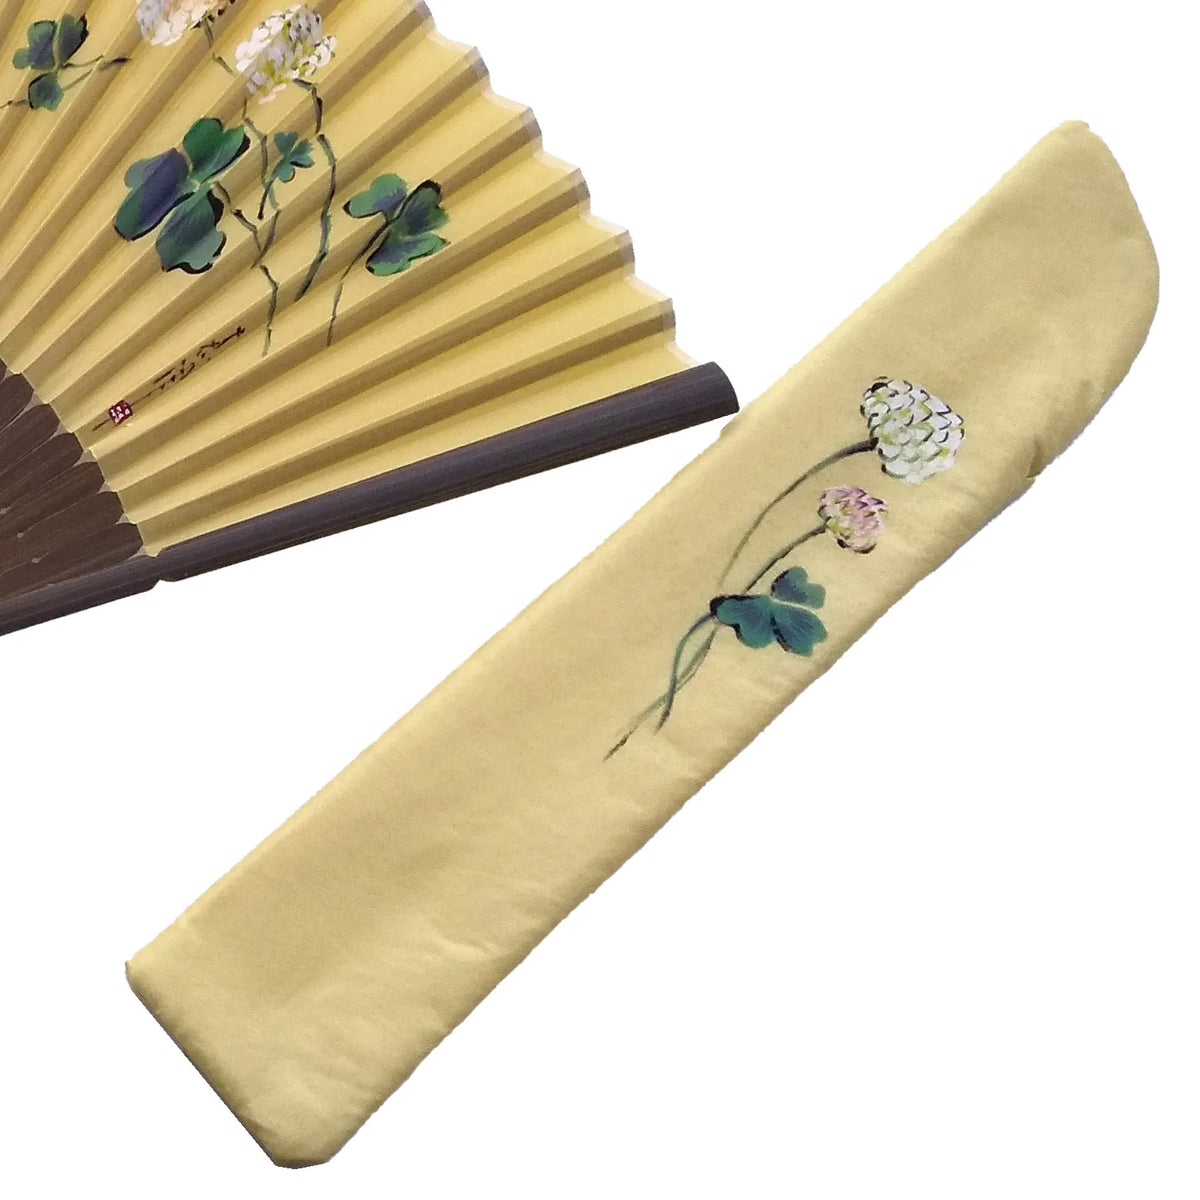 Silk fan, yellow narcissus with white clover illustration, one of a kind, in paulownia box